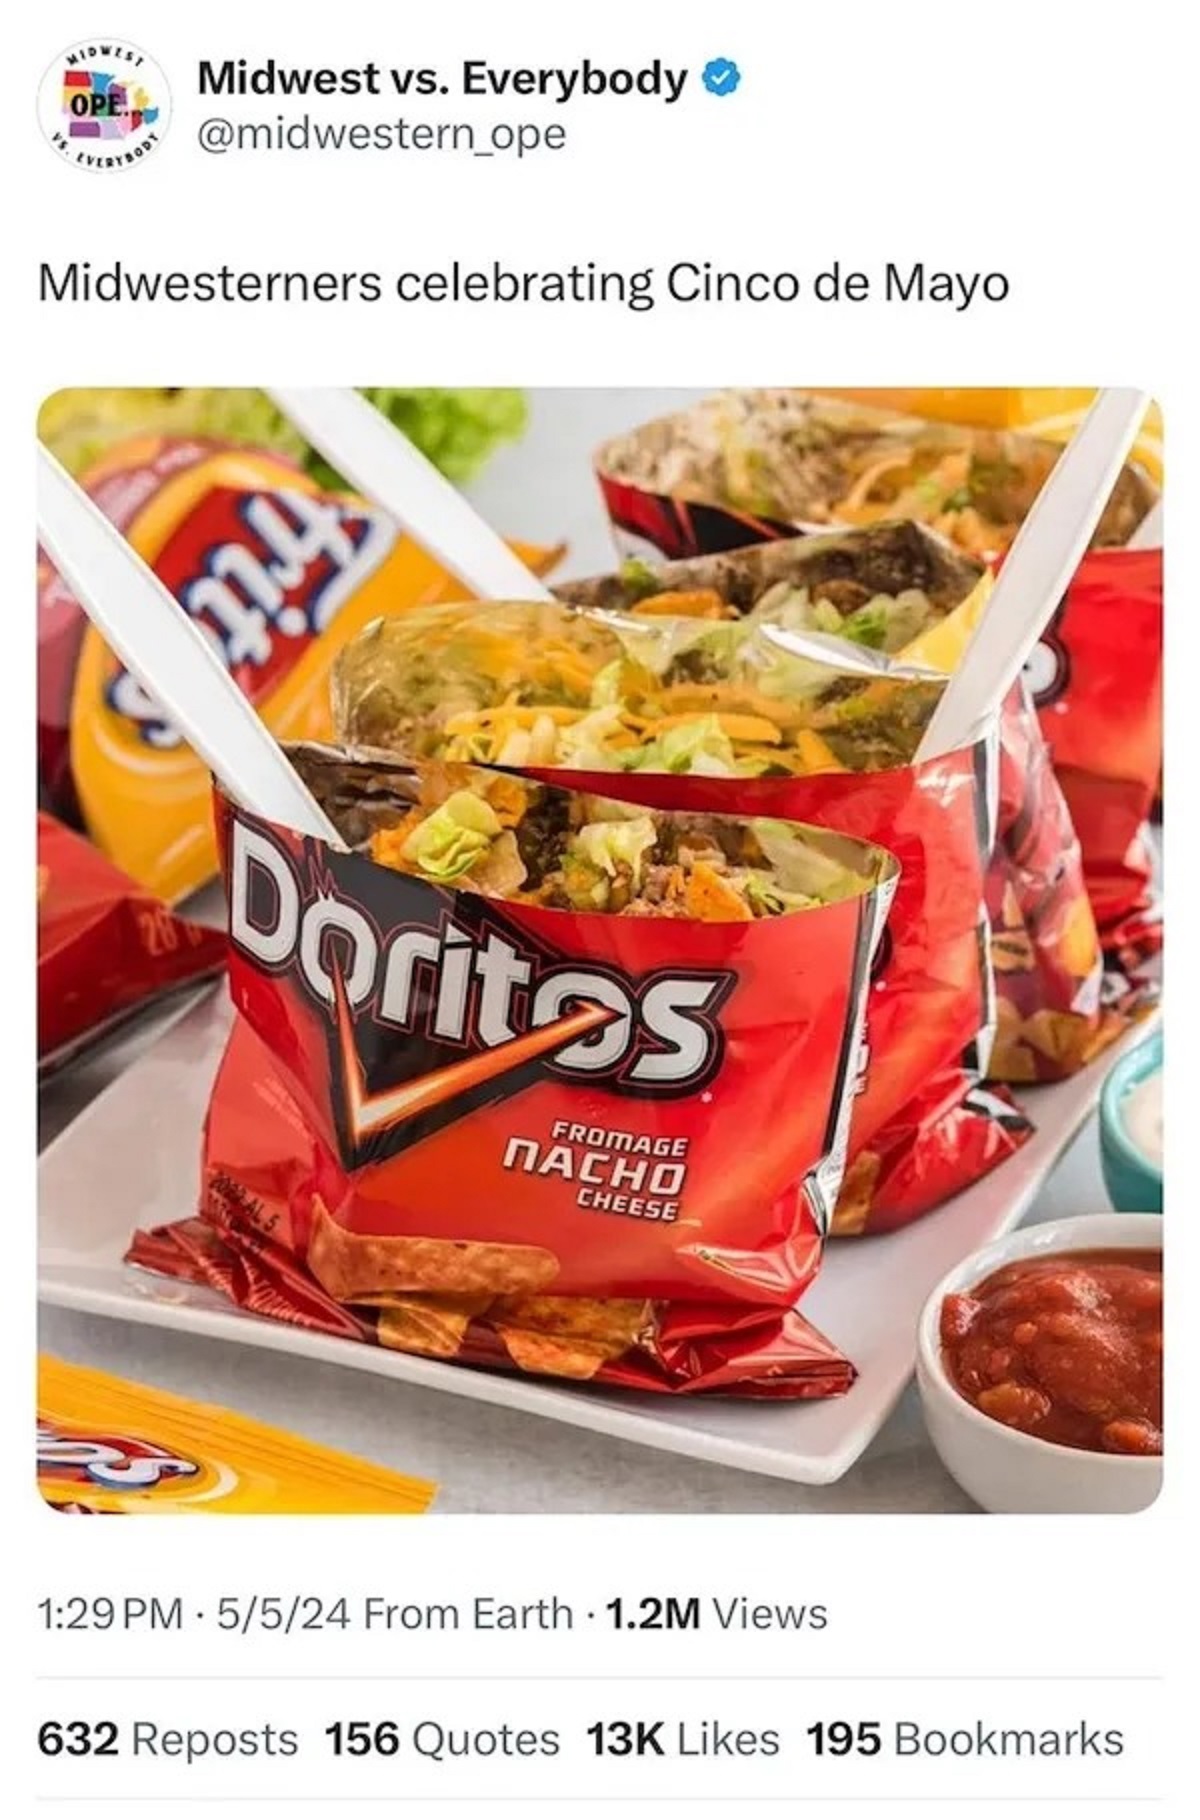 taco starterpack - Ope. Midwest vs. Everybody Everybody Midwesterners celebrating Cinco de Mayo frit Doritos Fromage Nacho Cheese 5524 From Earth 1.2M Views 632 Reposts 156 Quotes 13K 195 Bookmarks.